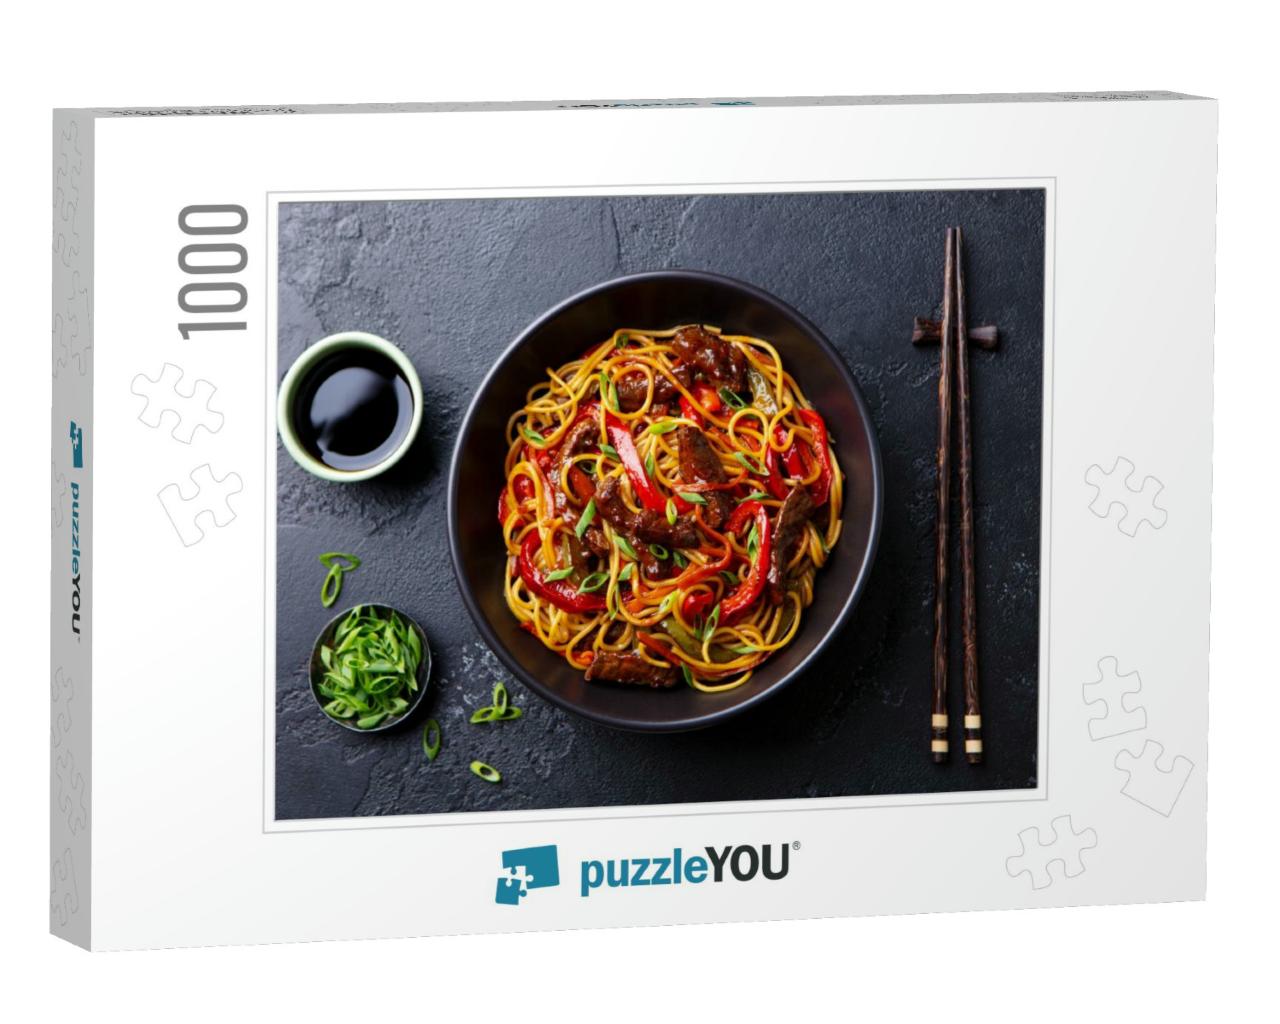 Stir Fry Noodles with Vegetables & Beef in Black Bowl. Sl... Jigsaw Puzzle with 1000 pieces